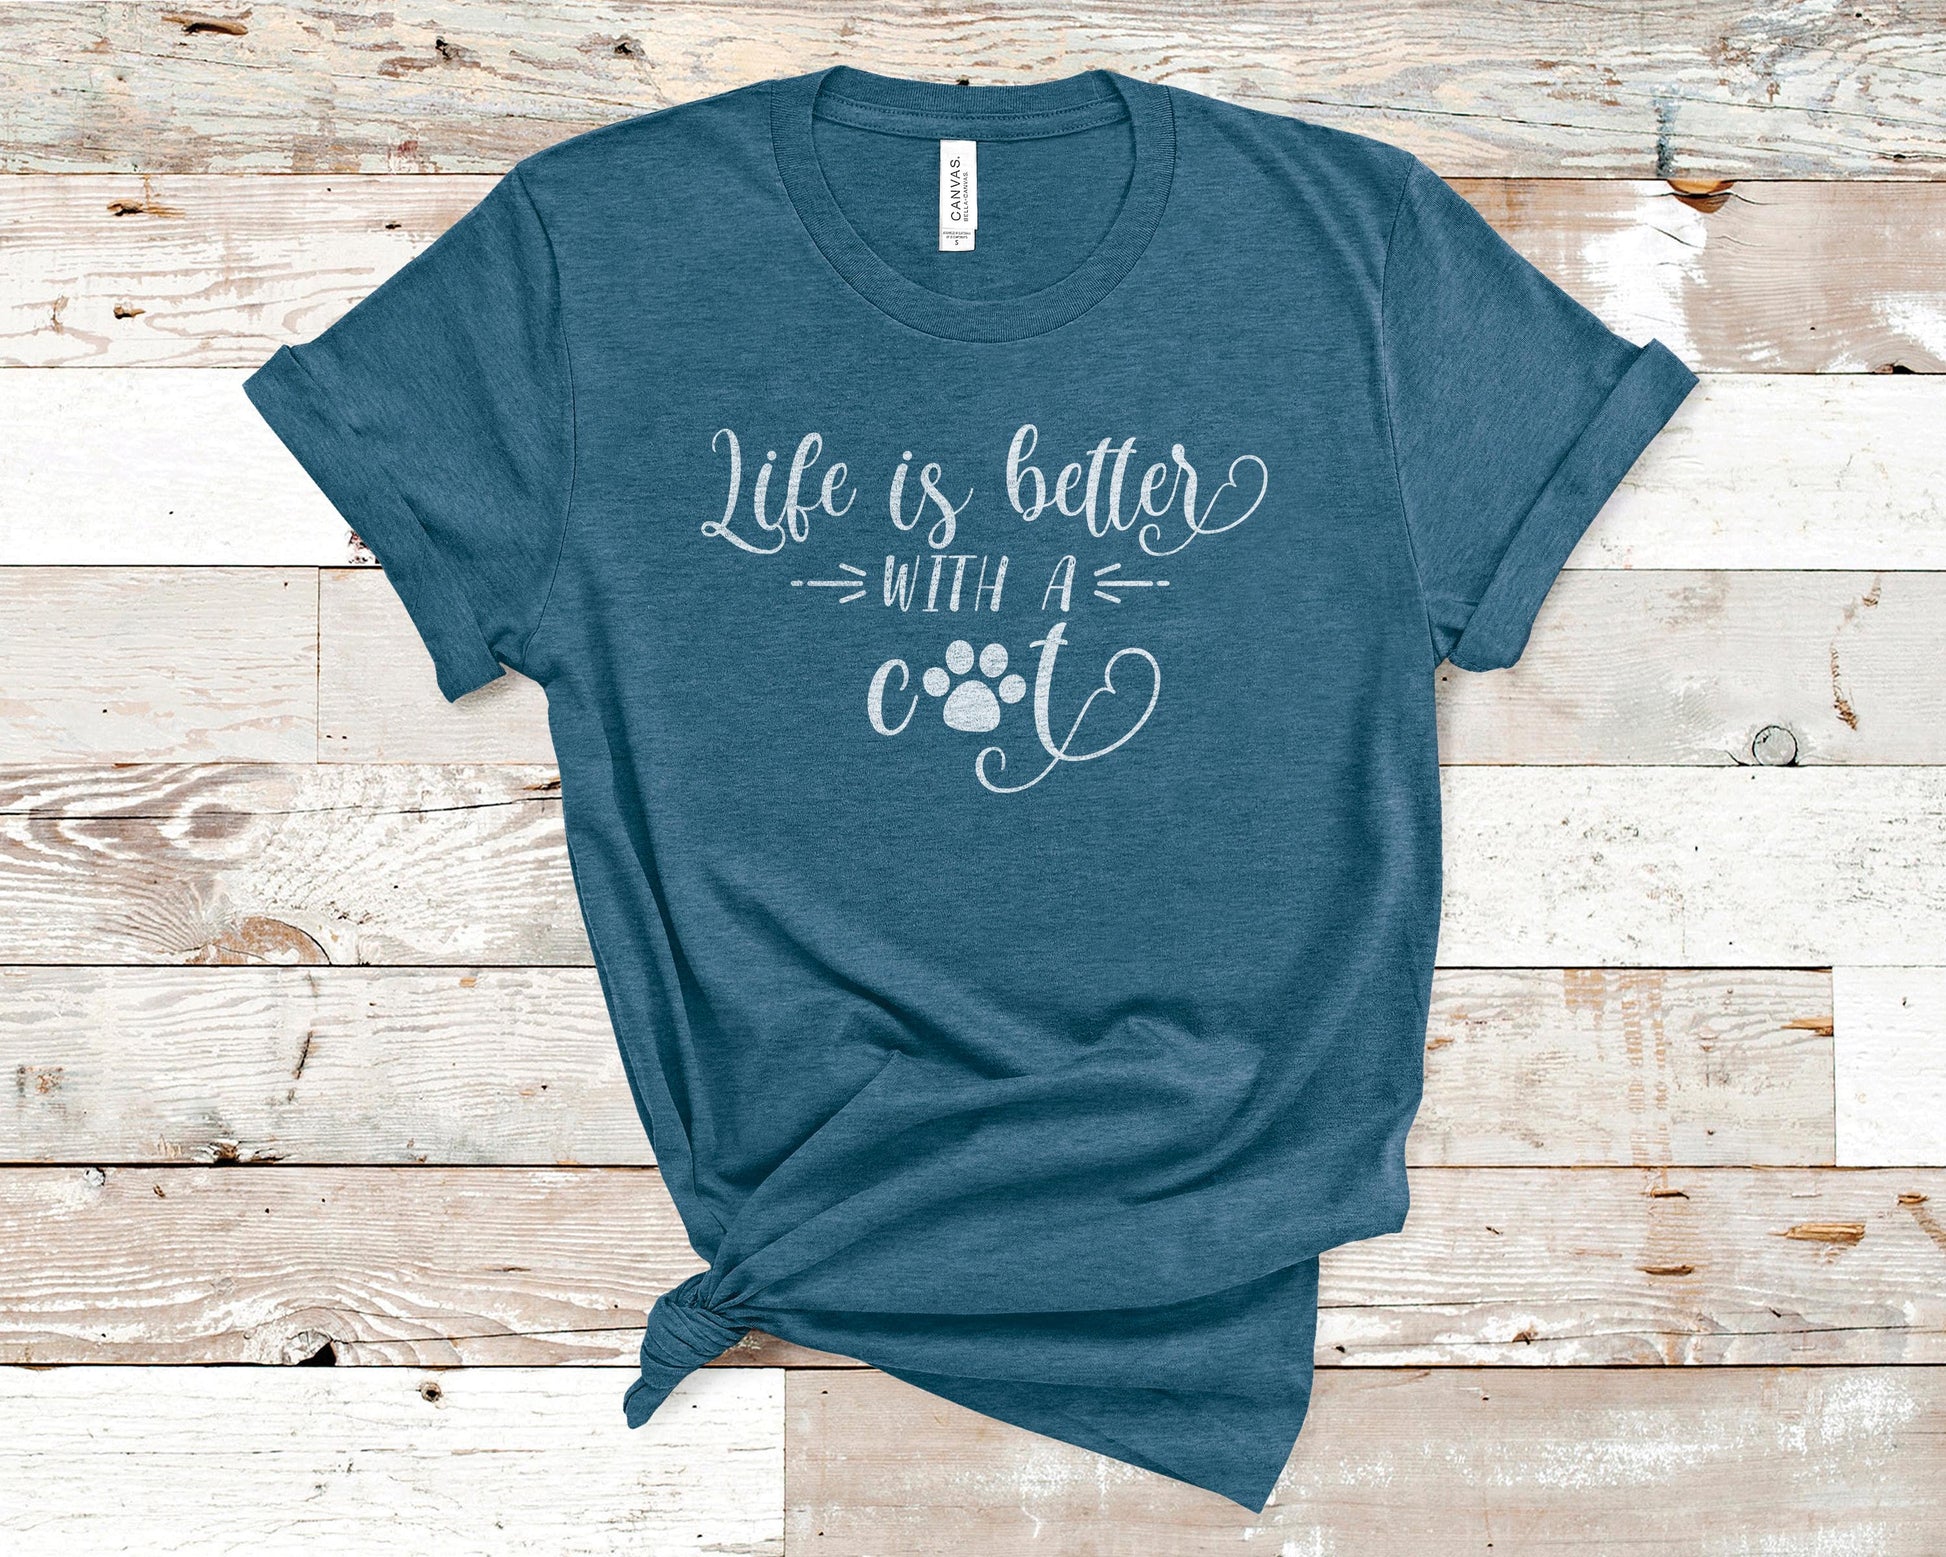 Pet Lovers Tees, Cat Lovers Shirts, Tshirt Gift for Pet Owners, Funny Cat T-Shirt